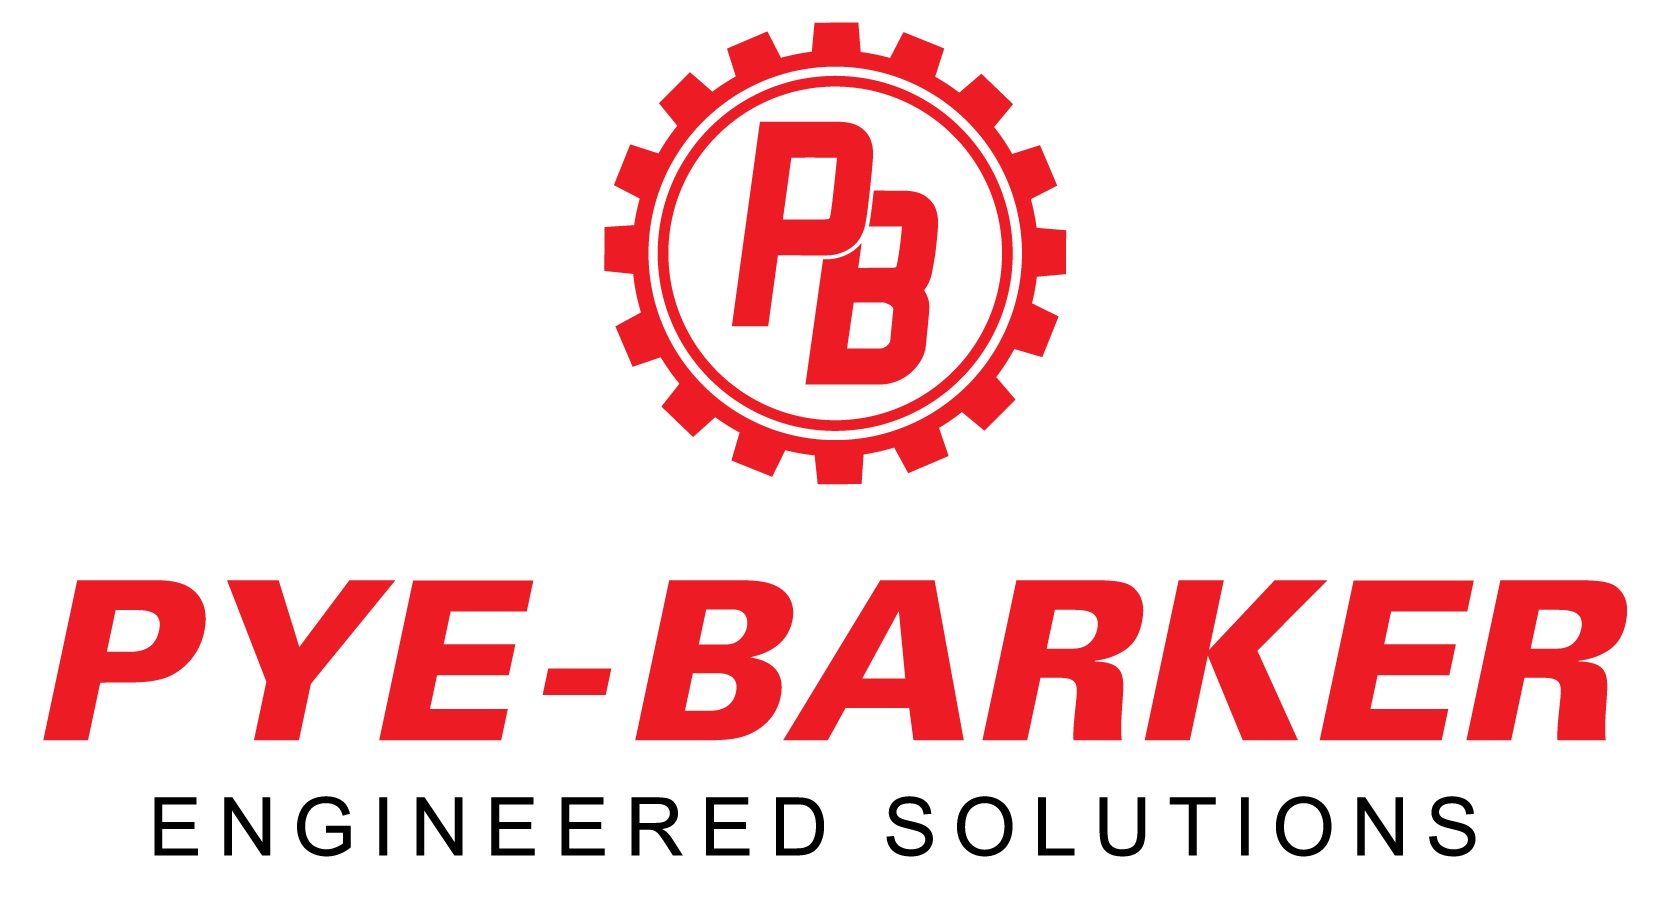 Get the best pump, blower, vacuum system, air compressor, or complete system for your specific needs at pyebarker.com.